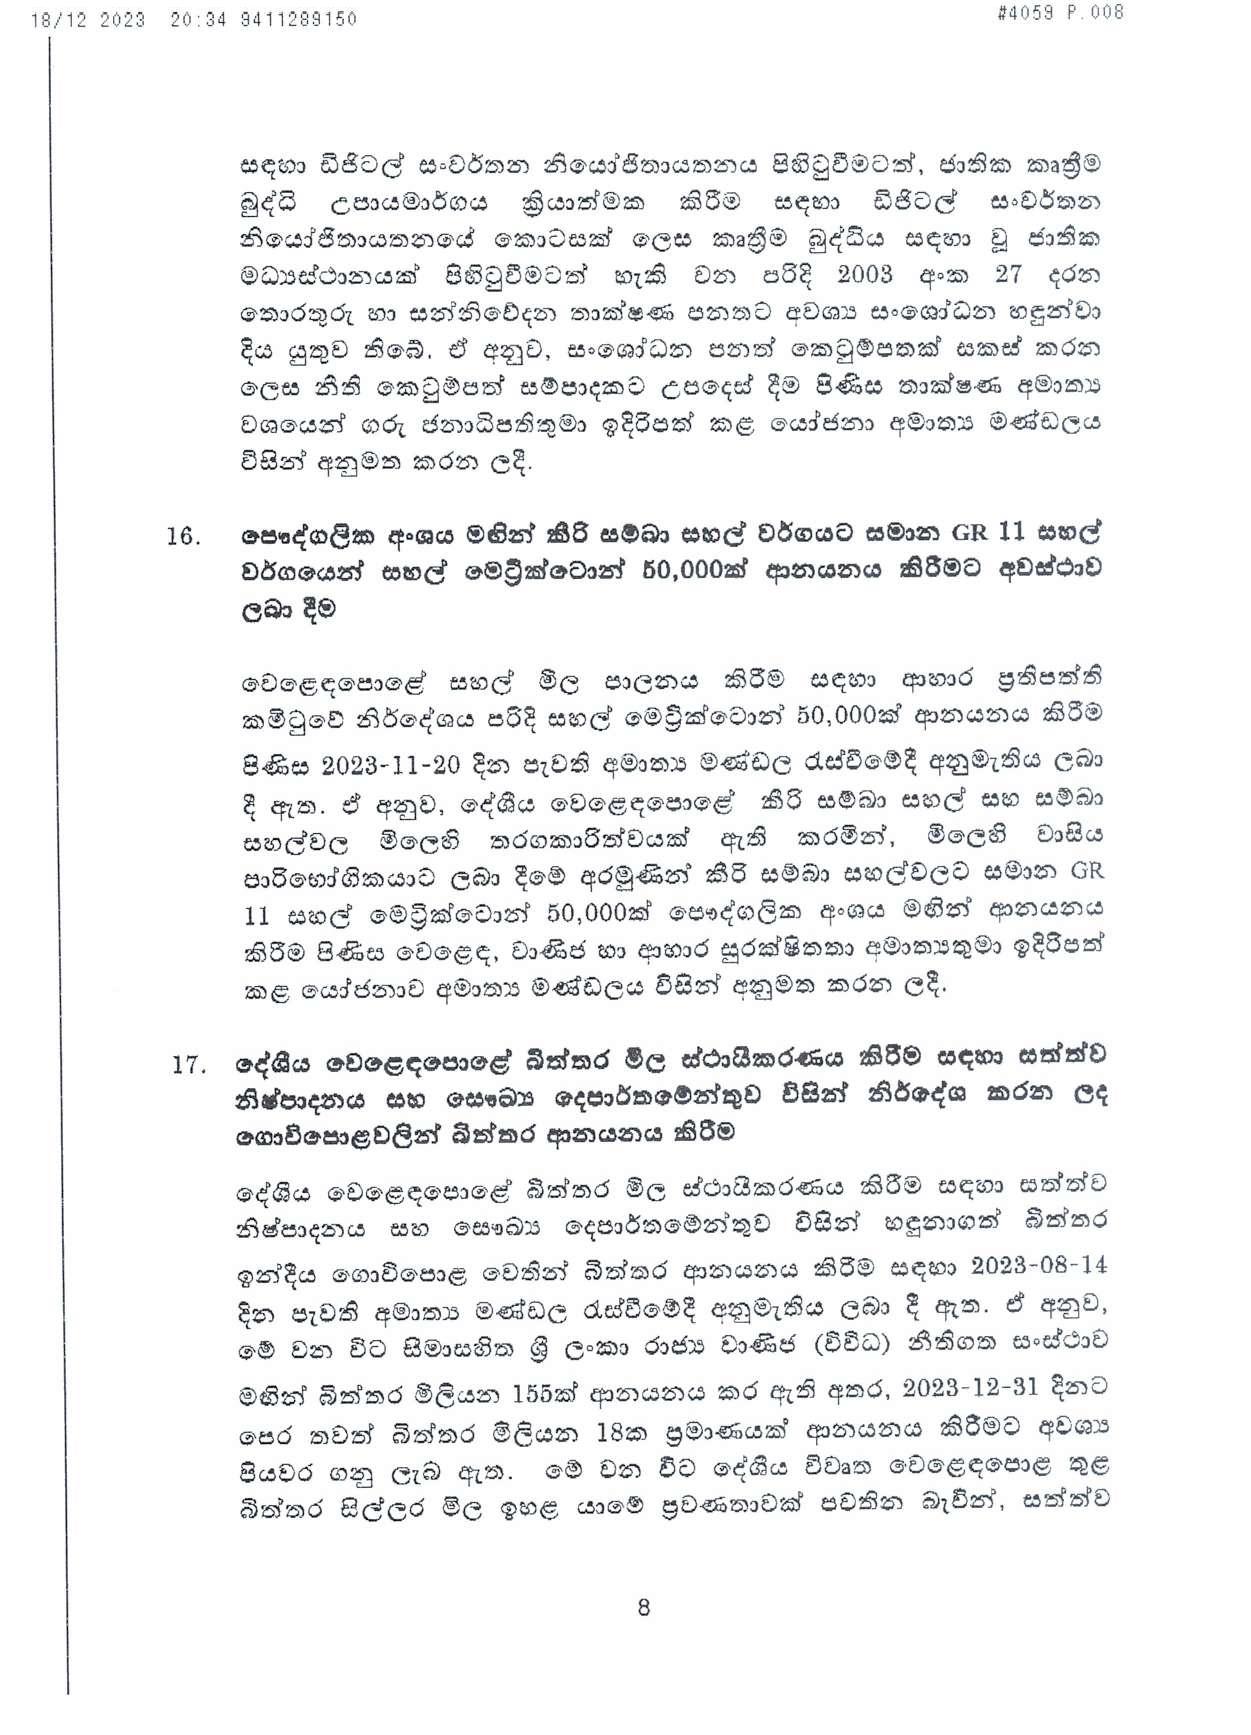 Cabinet Decision on 18.12.2023 page 008